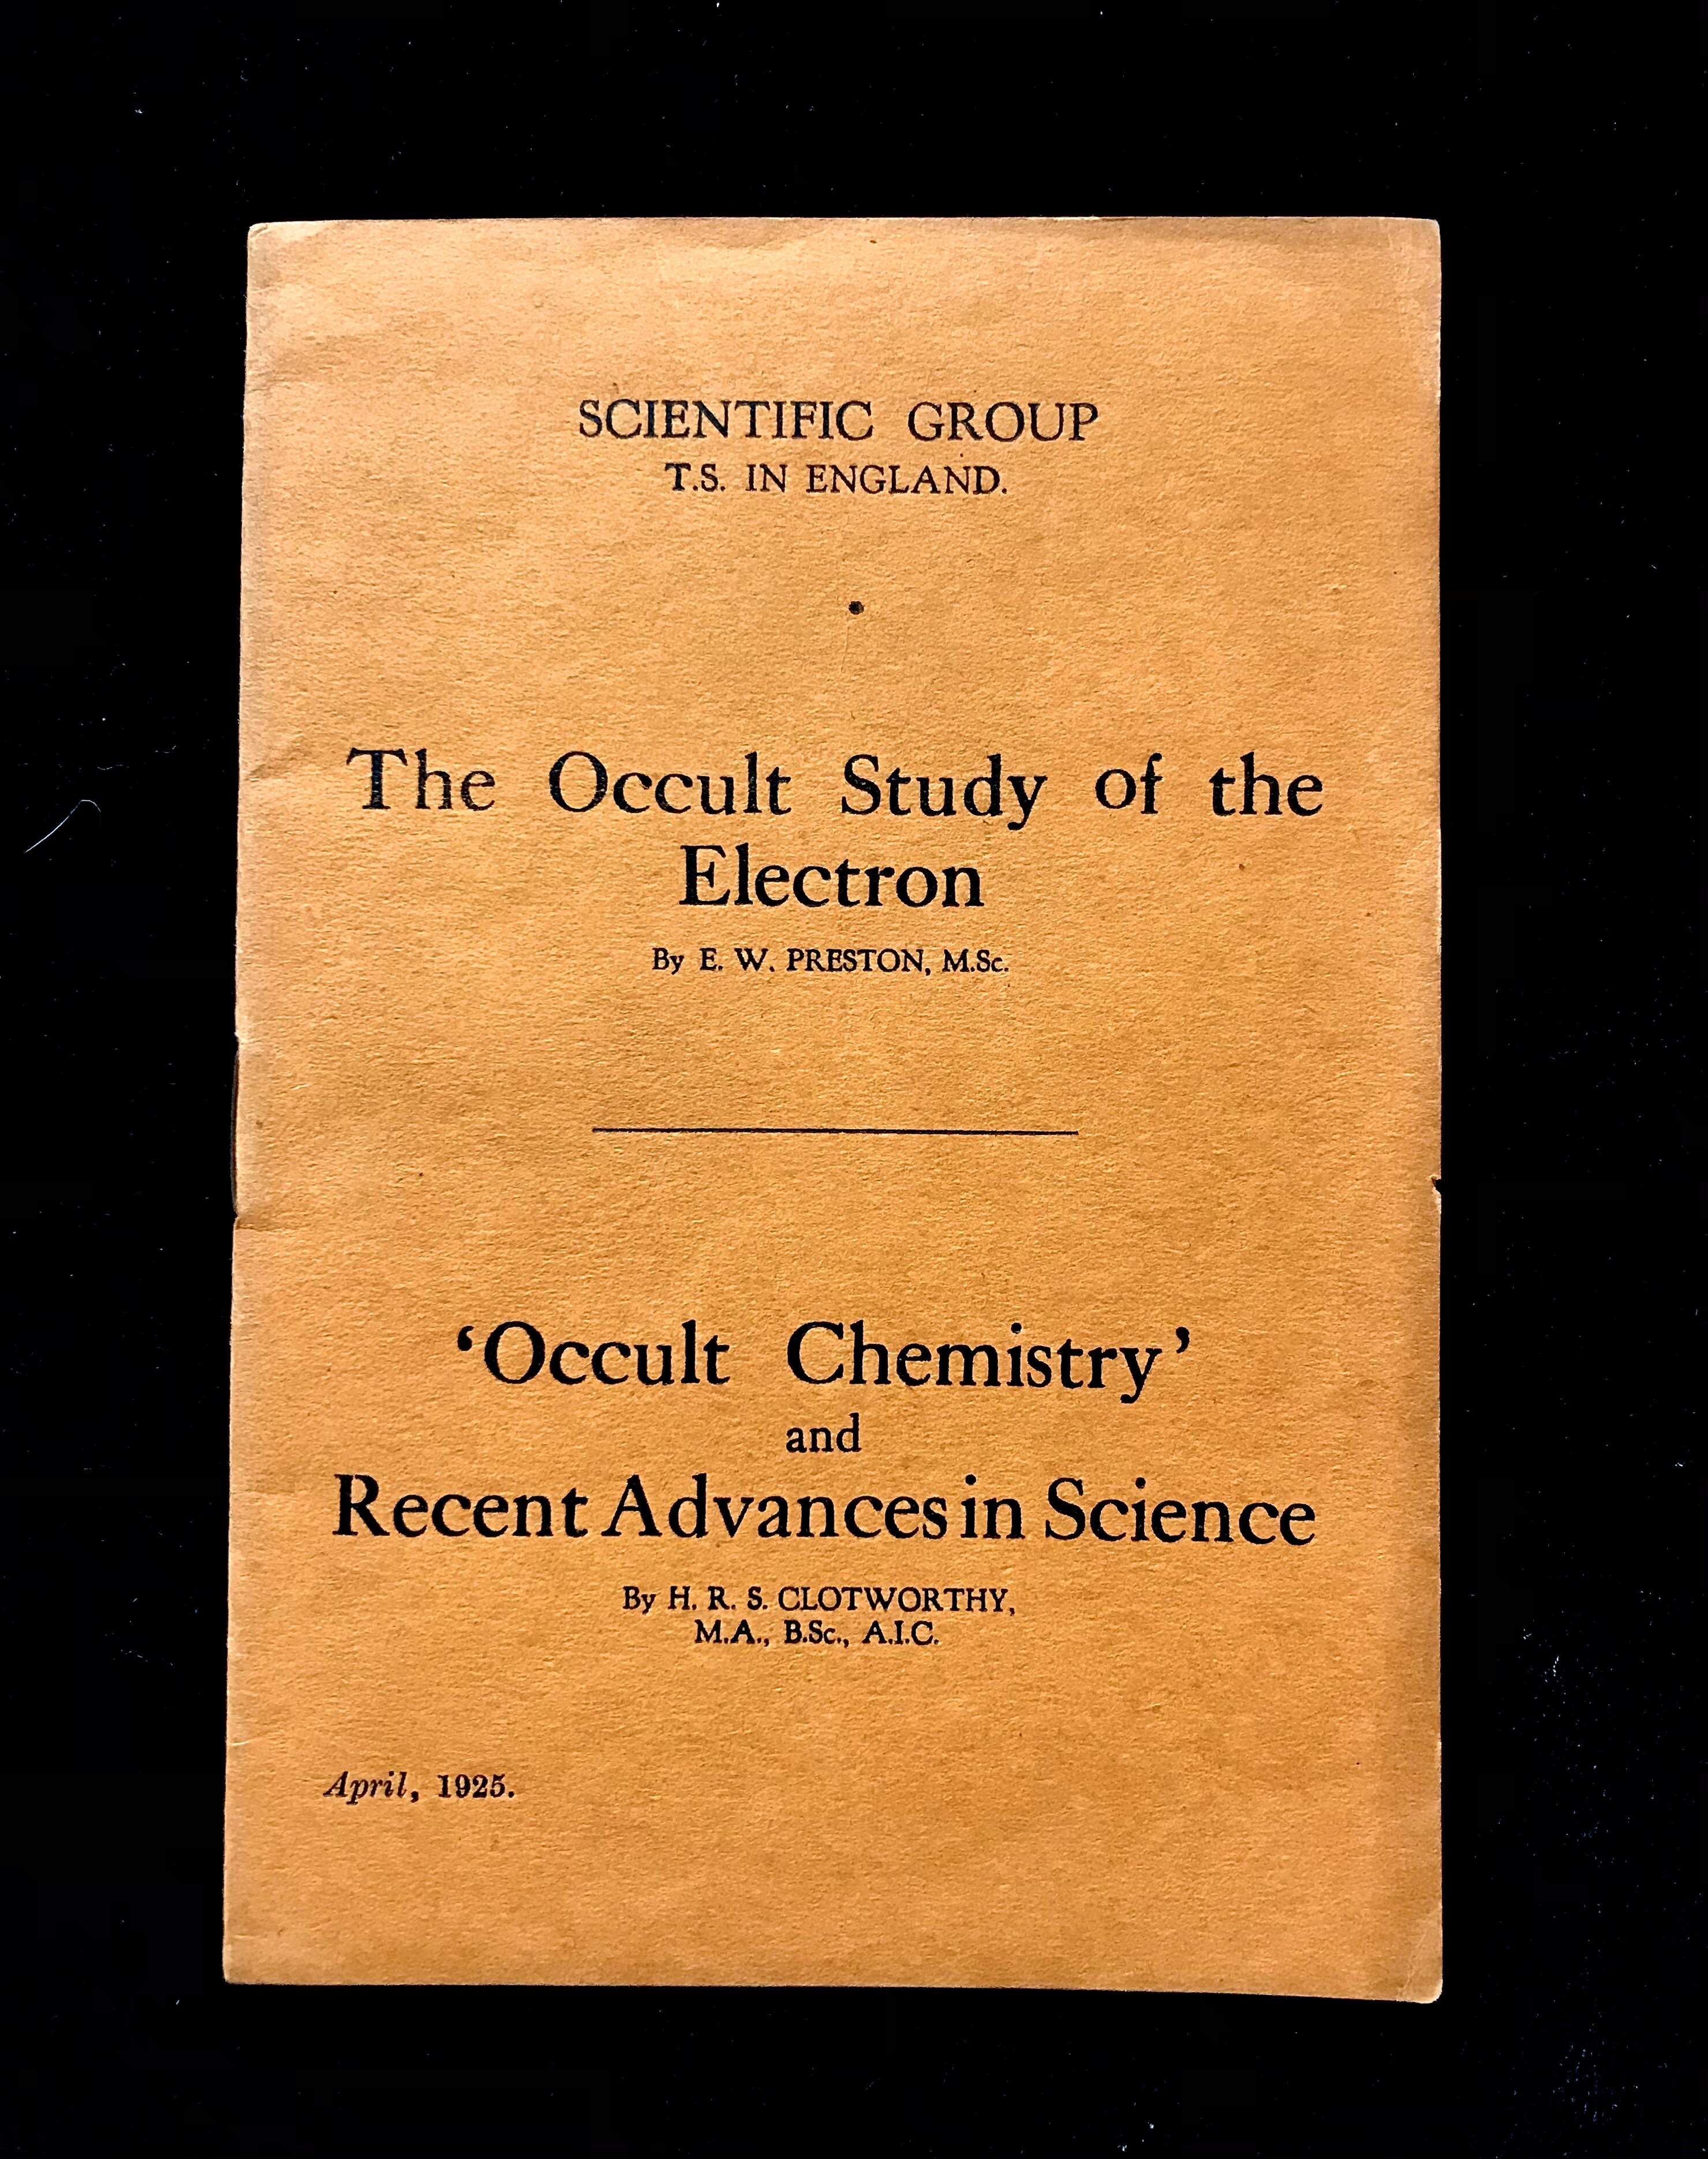 The Occult Study of the Electron & Occult Chemistry and Recent Advances In Science